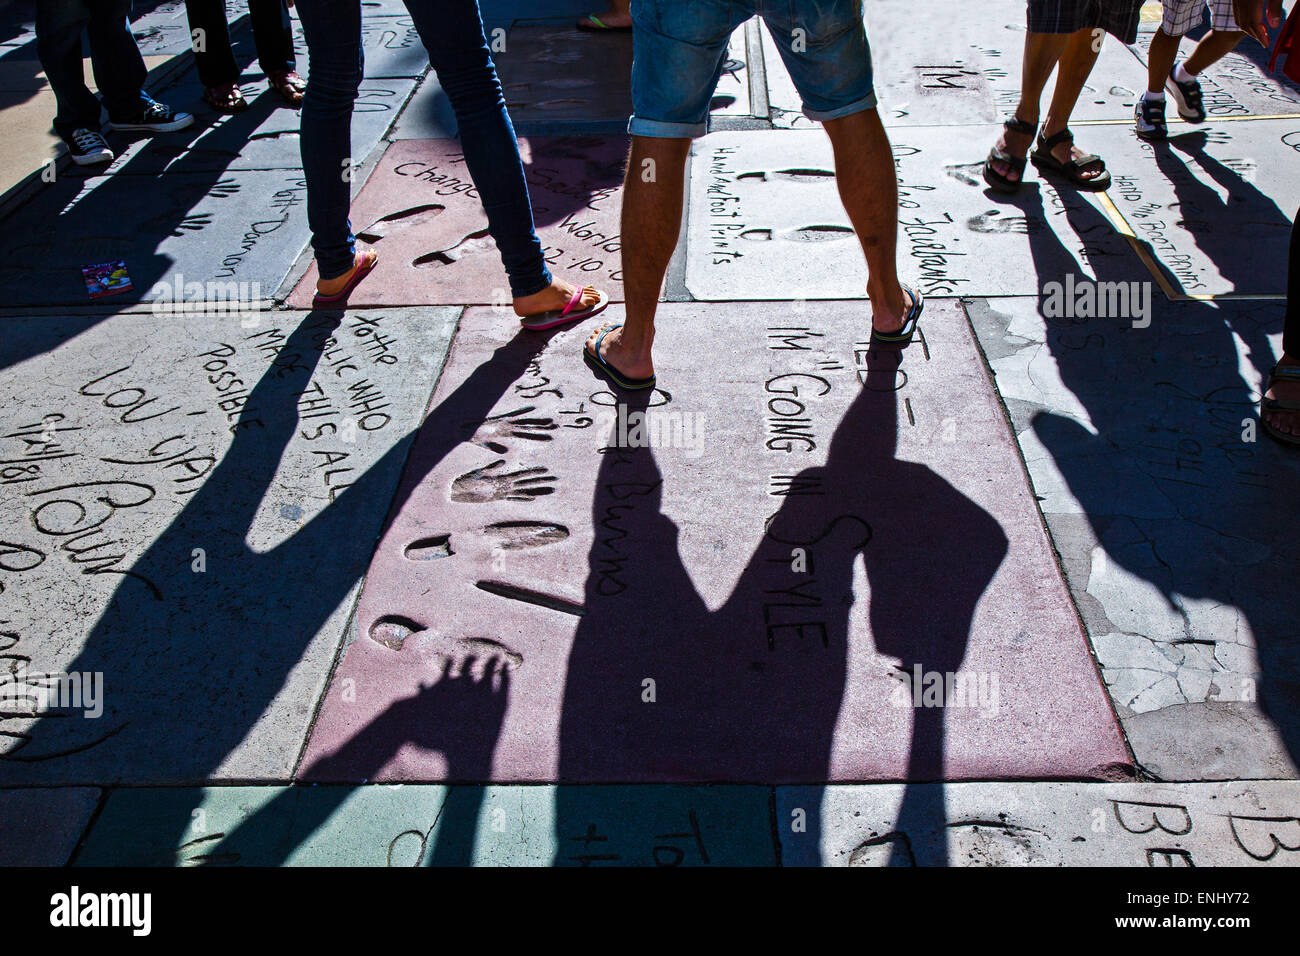 U.S.A., California, Los Angeles, Hollywood, hand and foot prints of celebrities outside the Grauman's Chinese Theatre Stock Photo